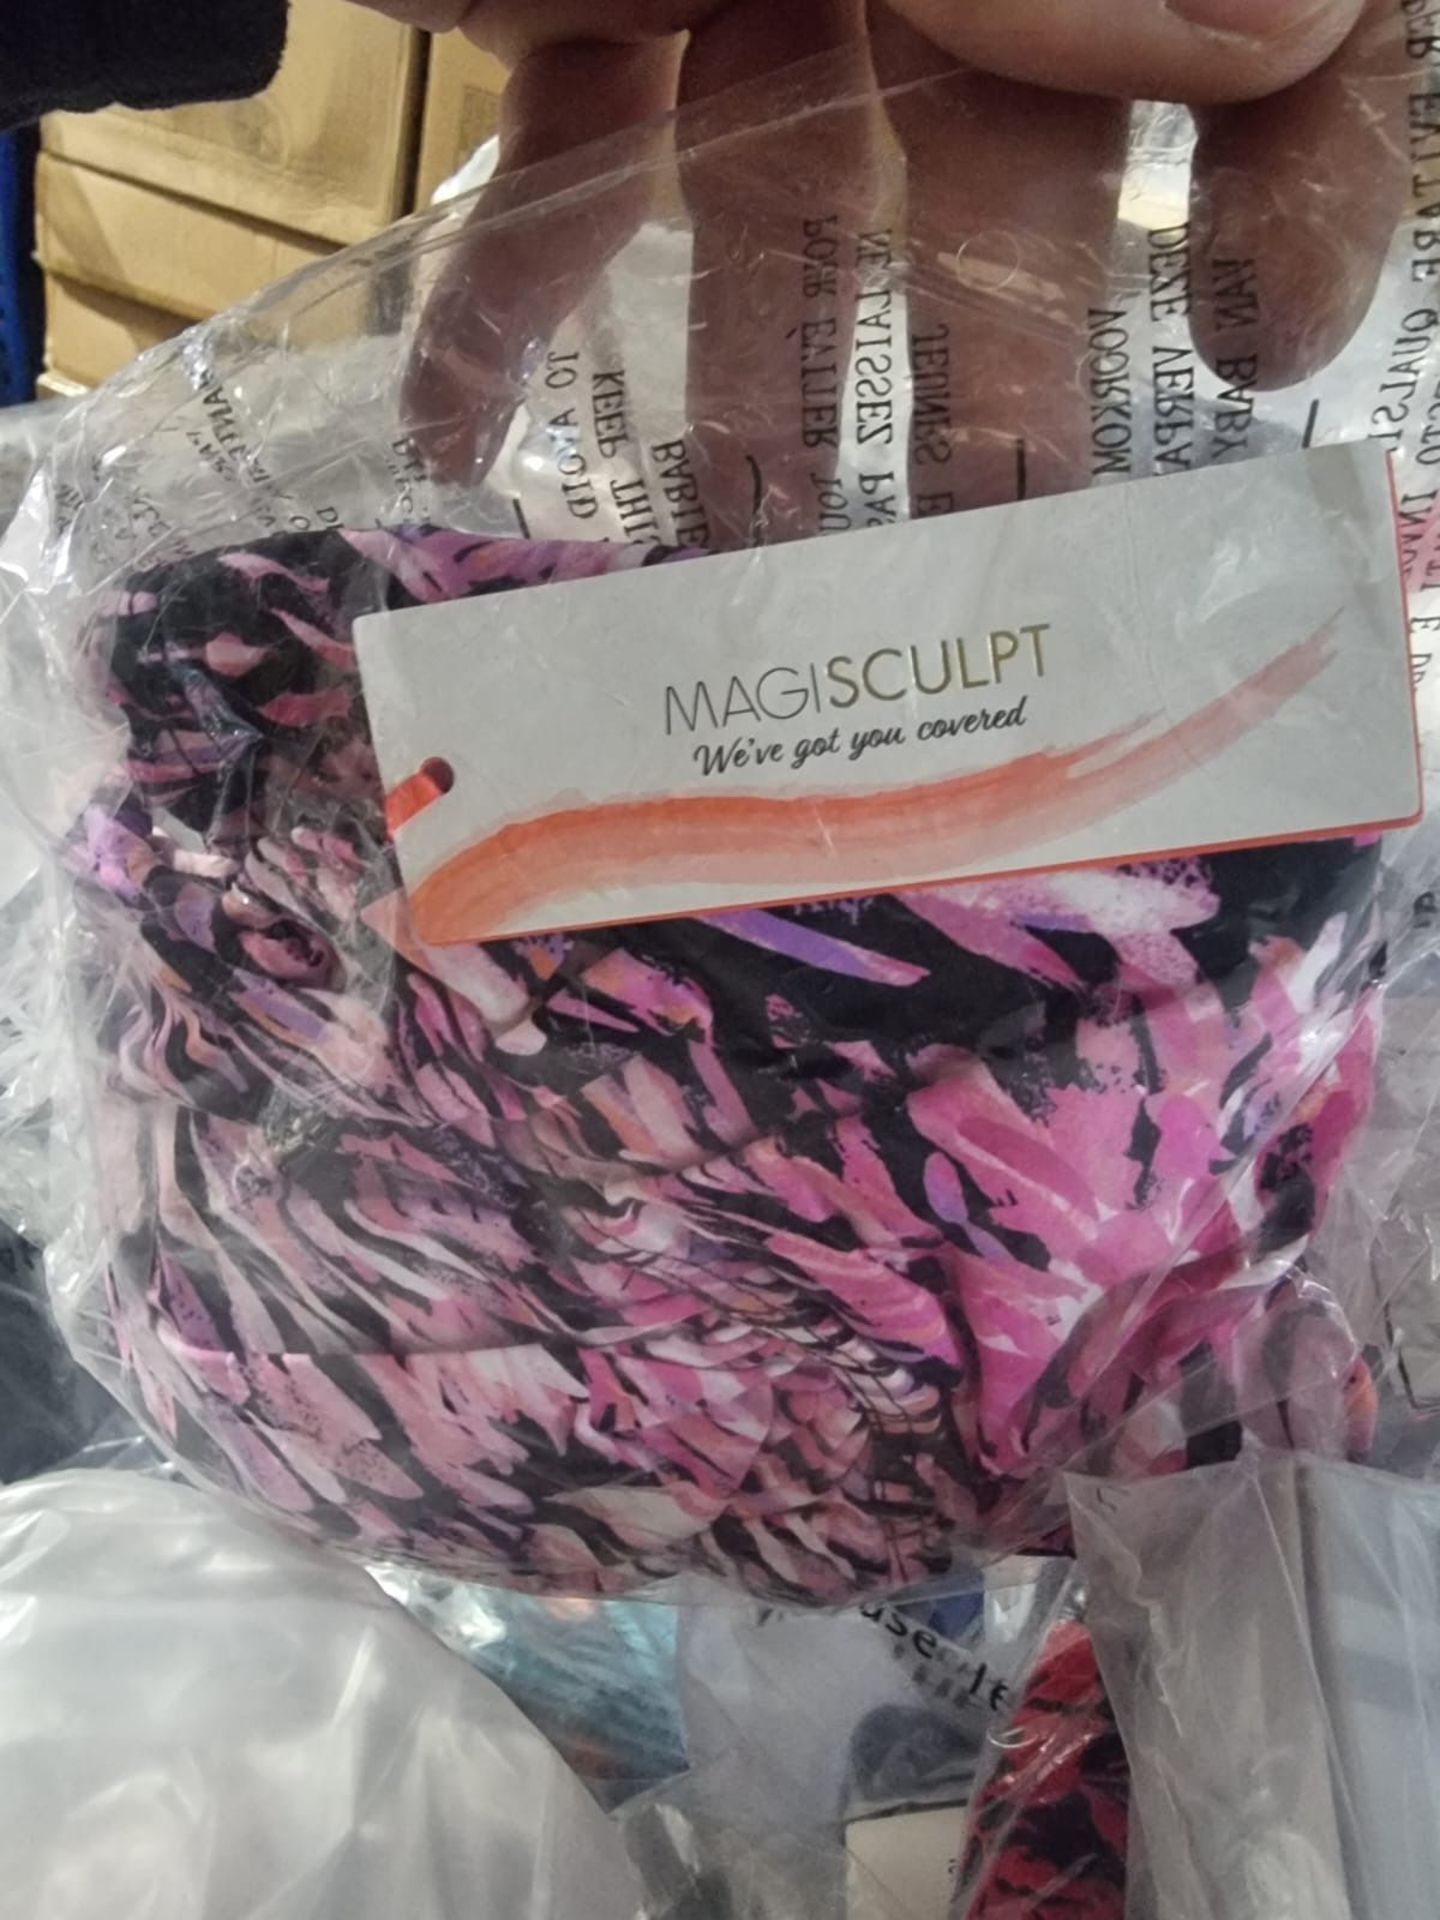 100 x NEW PACKAGED ASSORTED SWIM & UNDERWEAR FROM BRAND SUCH AS WONDERBRA, BOUX AVENUE, ANN SUMMERS, - Image 8 of 53